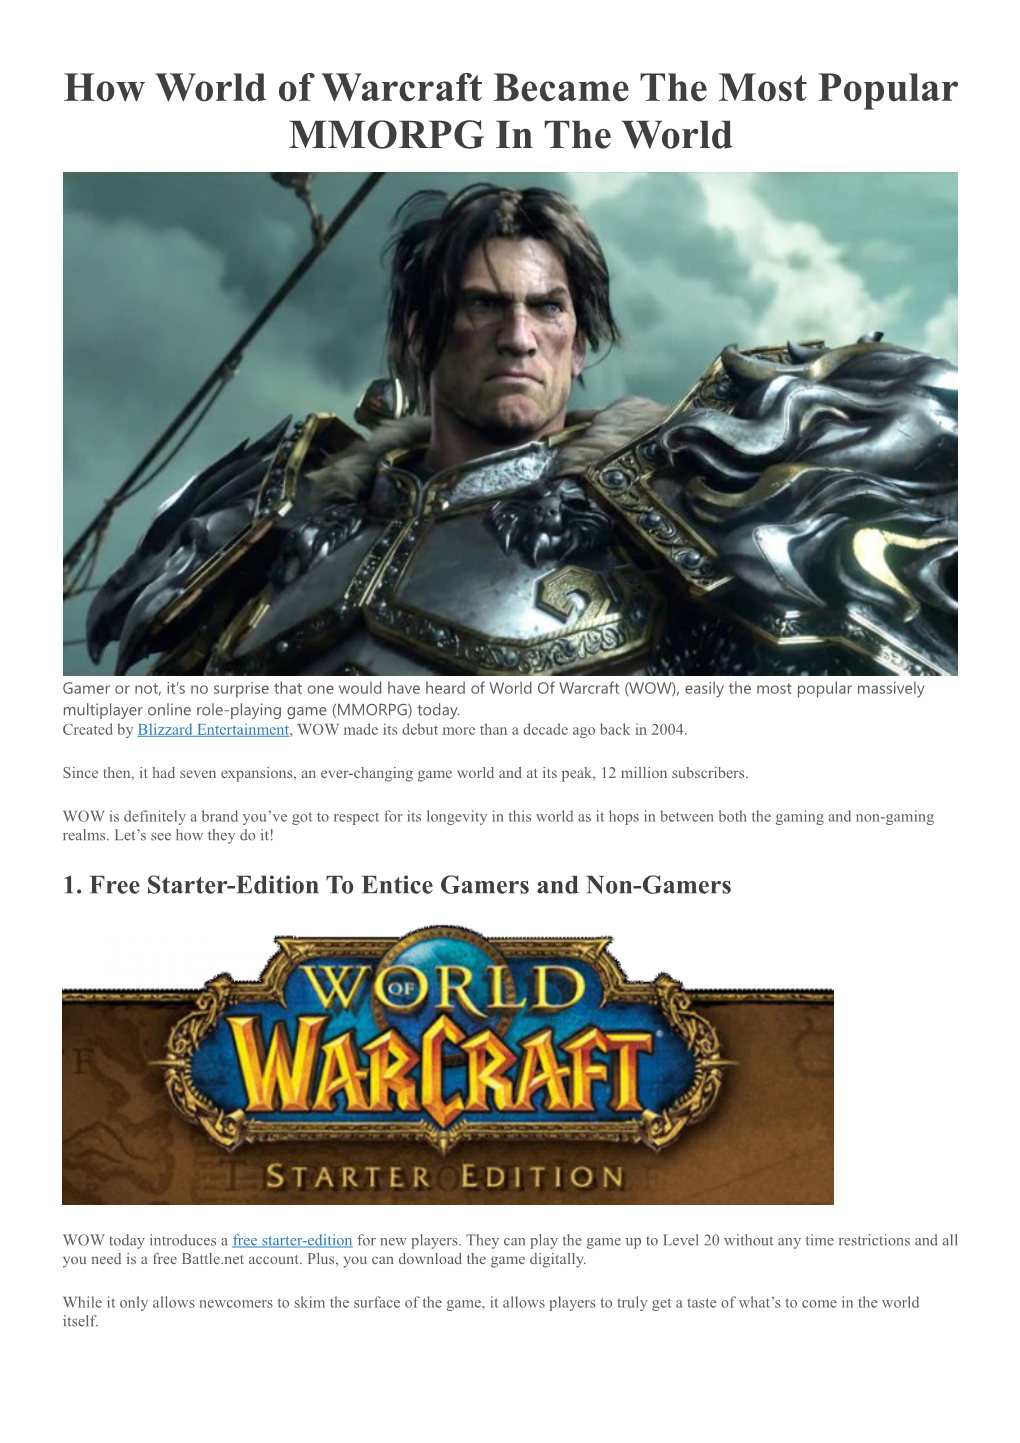 How World of Warcraft Became the Most Popular MMORPG in the World